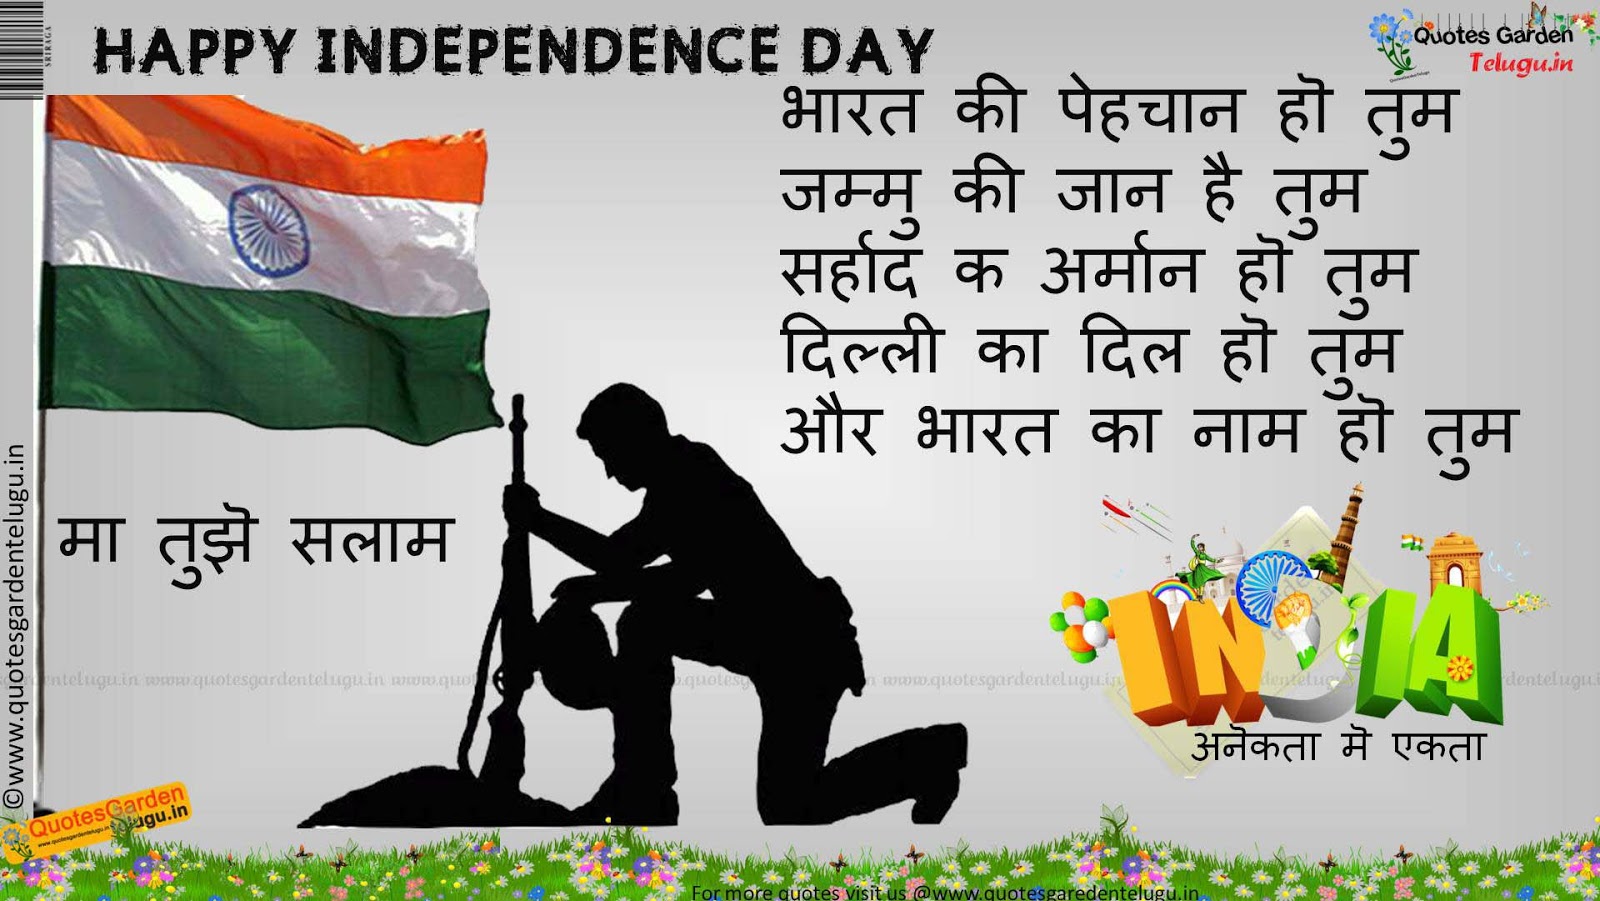 Best Independence day quotes in Hindi 885 | QUOTES GARDEN TELUGU ...